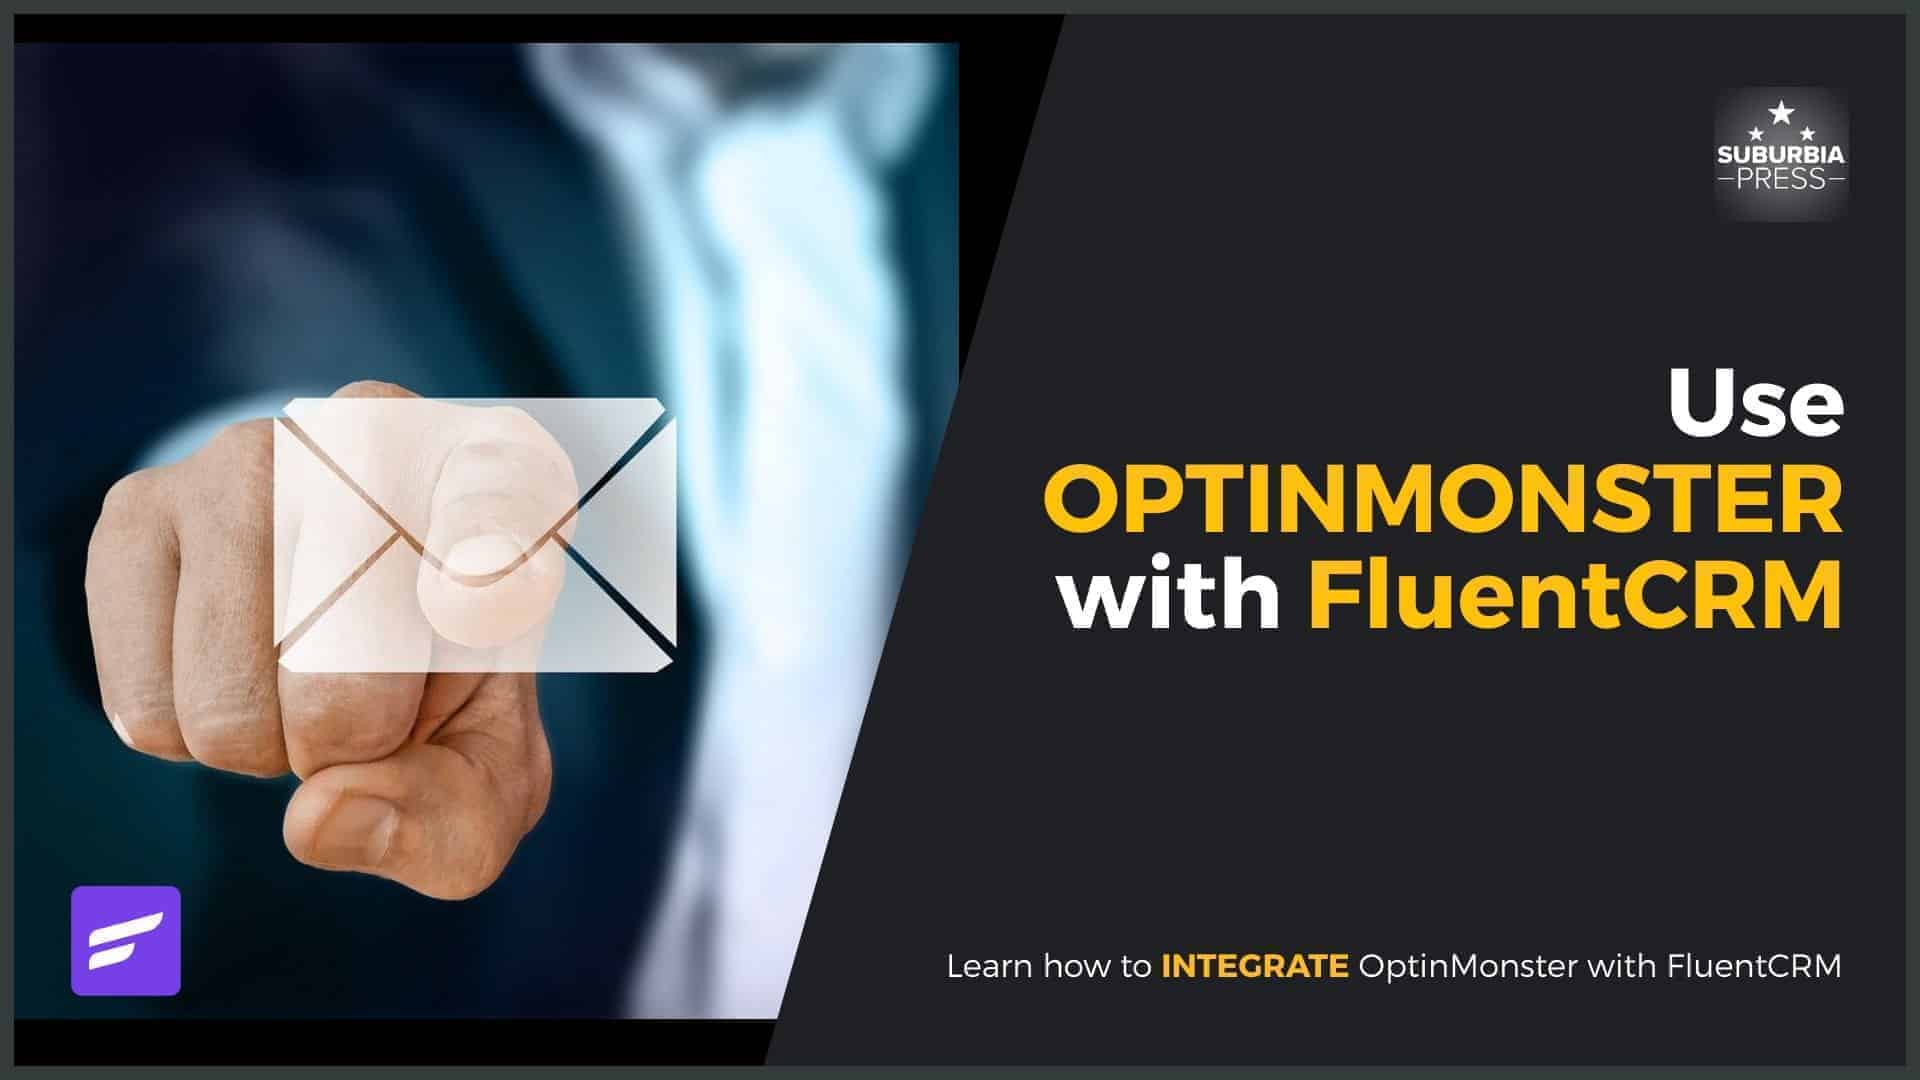 How to Use OptinMonster with FluentCRM in 6 Easy Steps